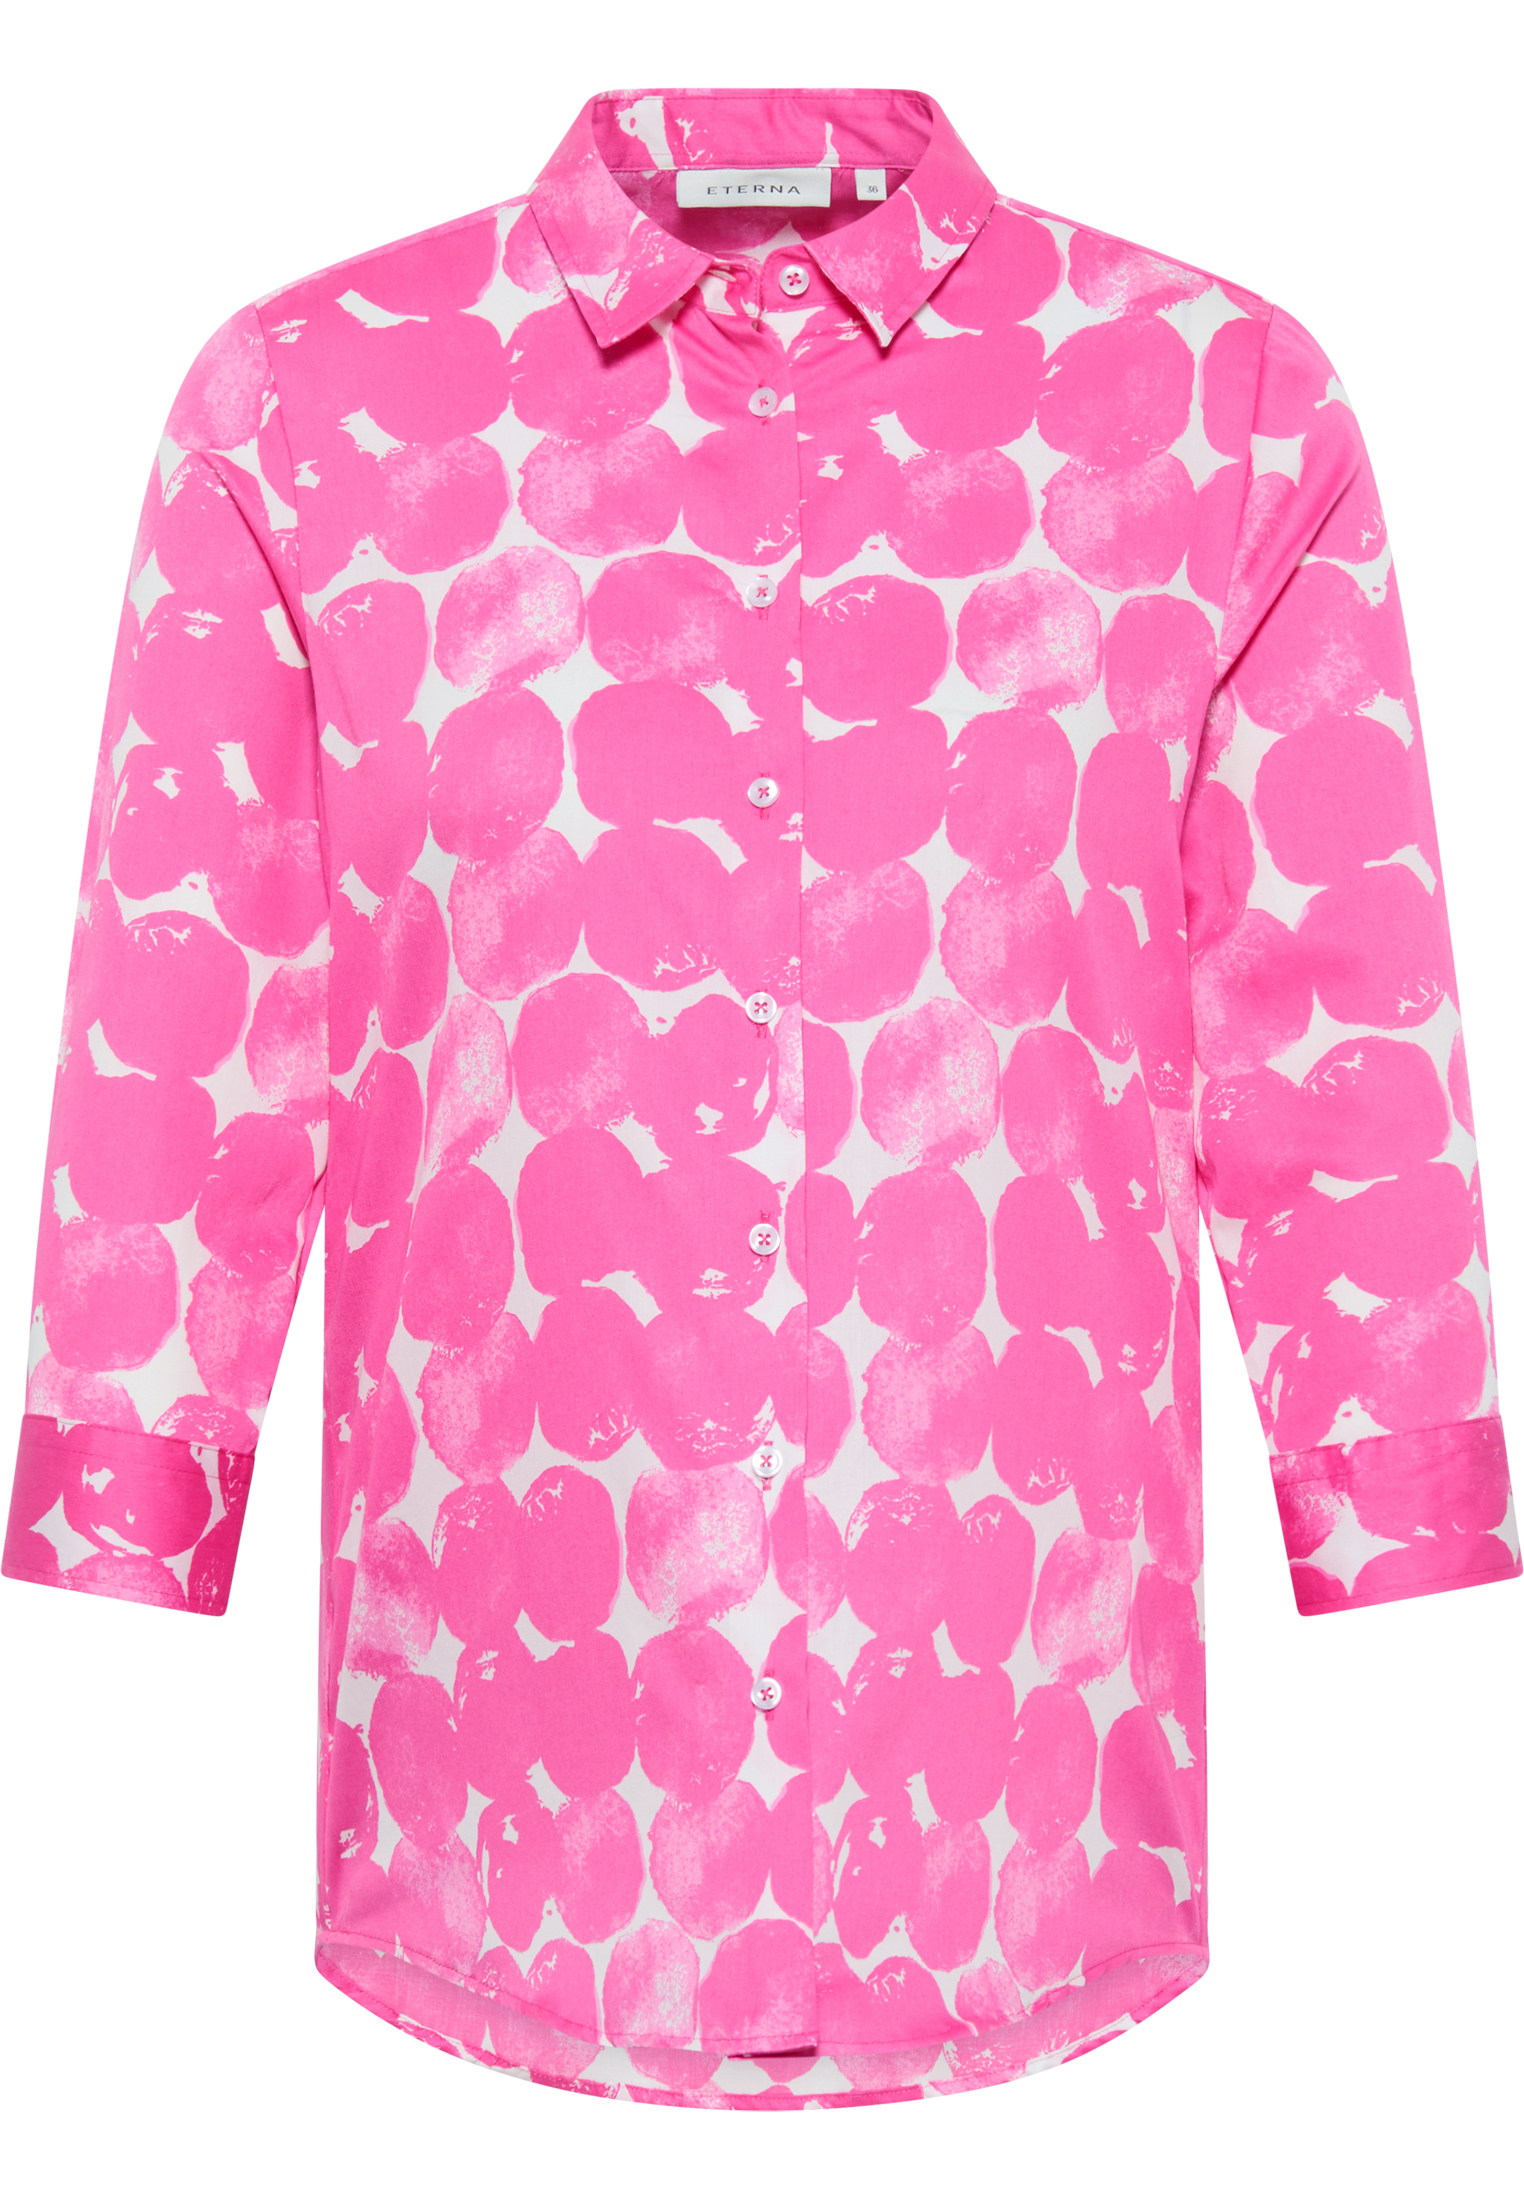 in sleeves pink shirt-blouse printed | 3/4 2BL03949-15-21-50-3/4 pink | | 50 |